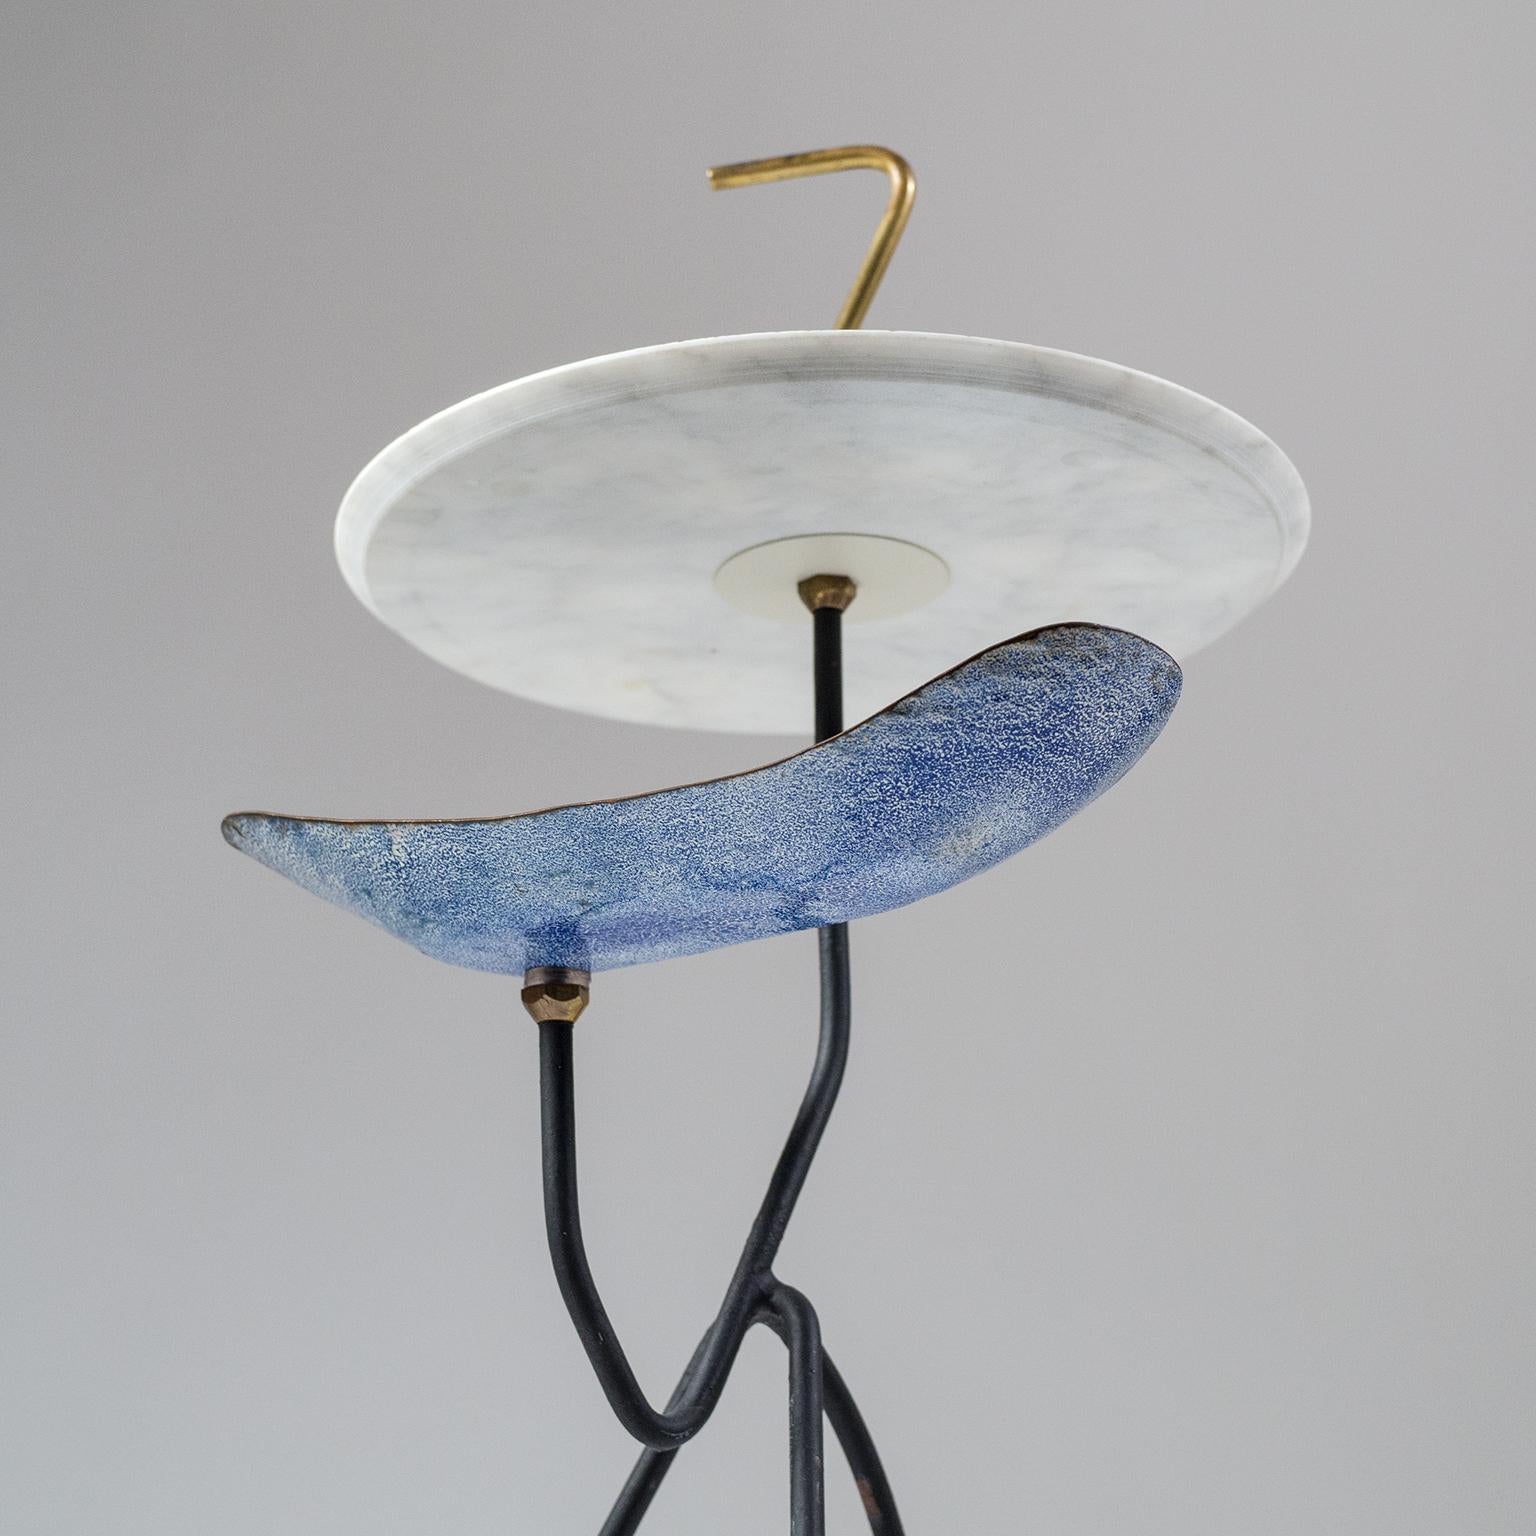 Mid-20th Century Sculptural Italian Side Table, 1950s, Marble, Brass and Enameled Copper